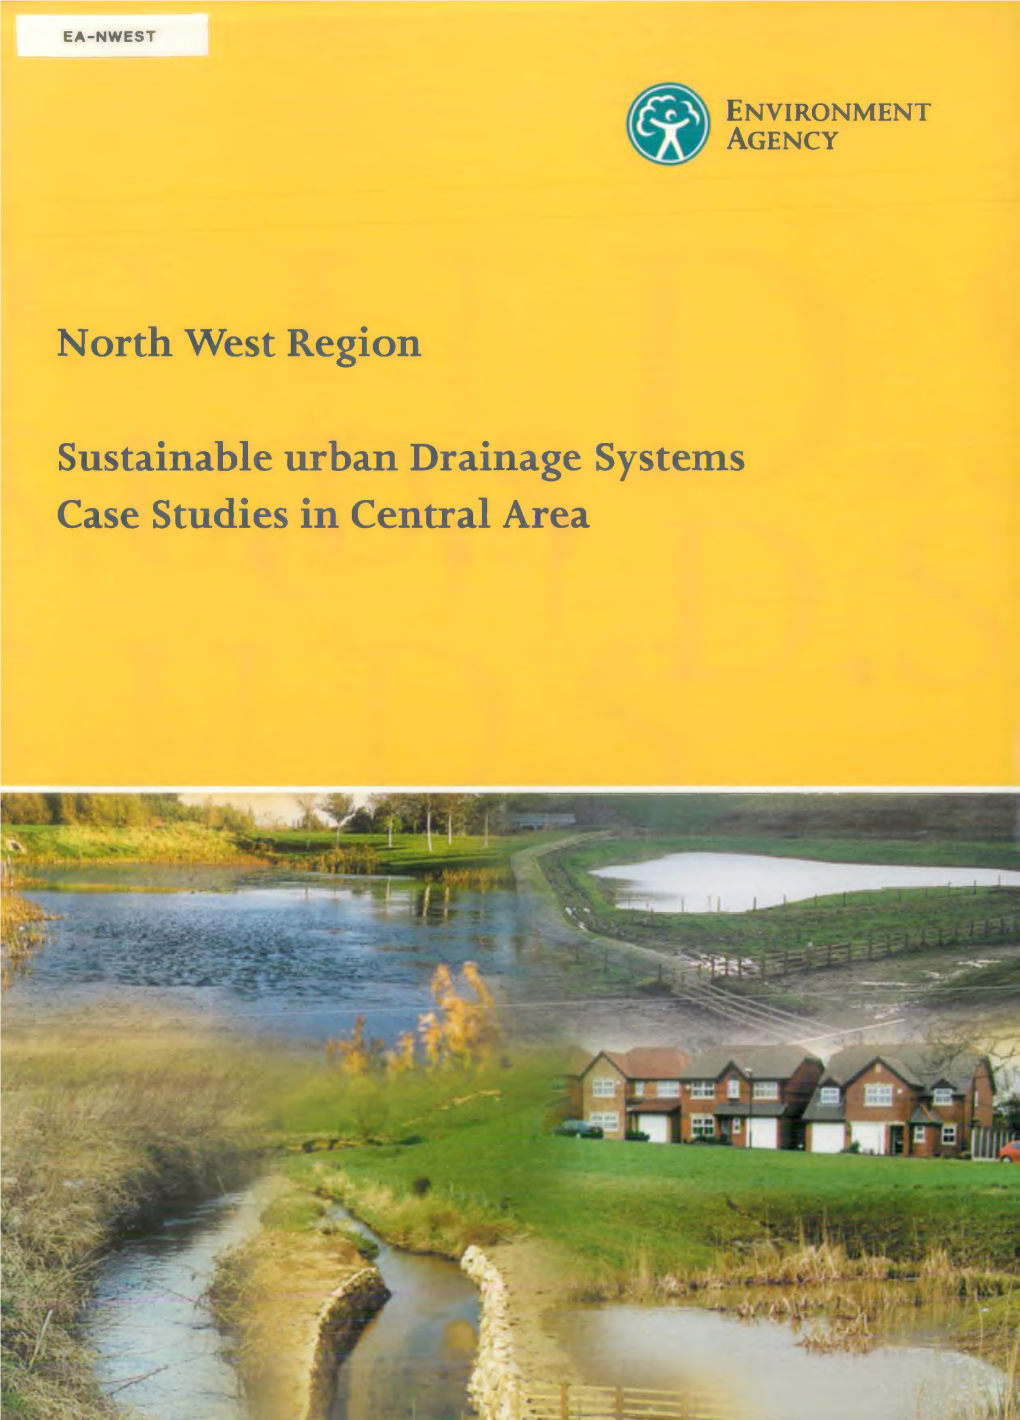 North West Region Sustainable Urban Drainage Systems Case Studies in Central Area